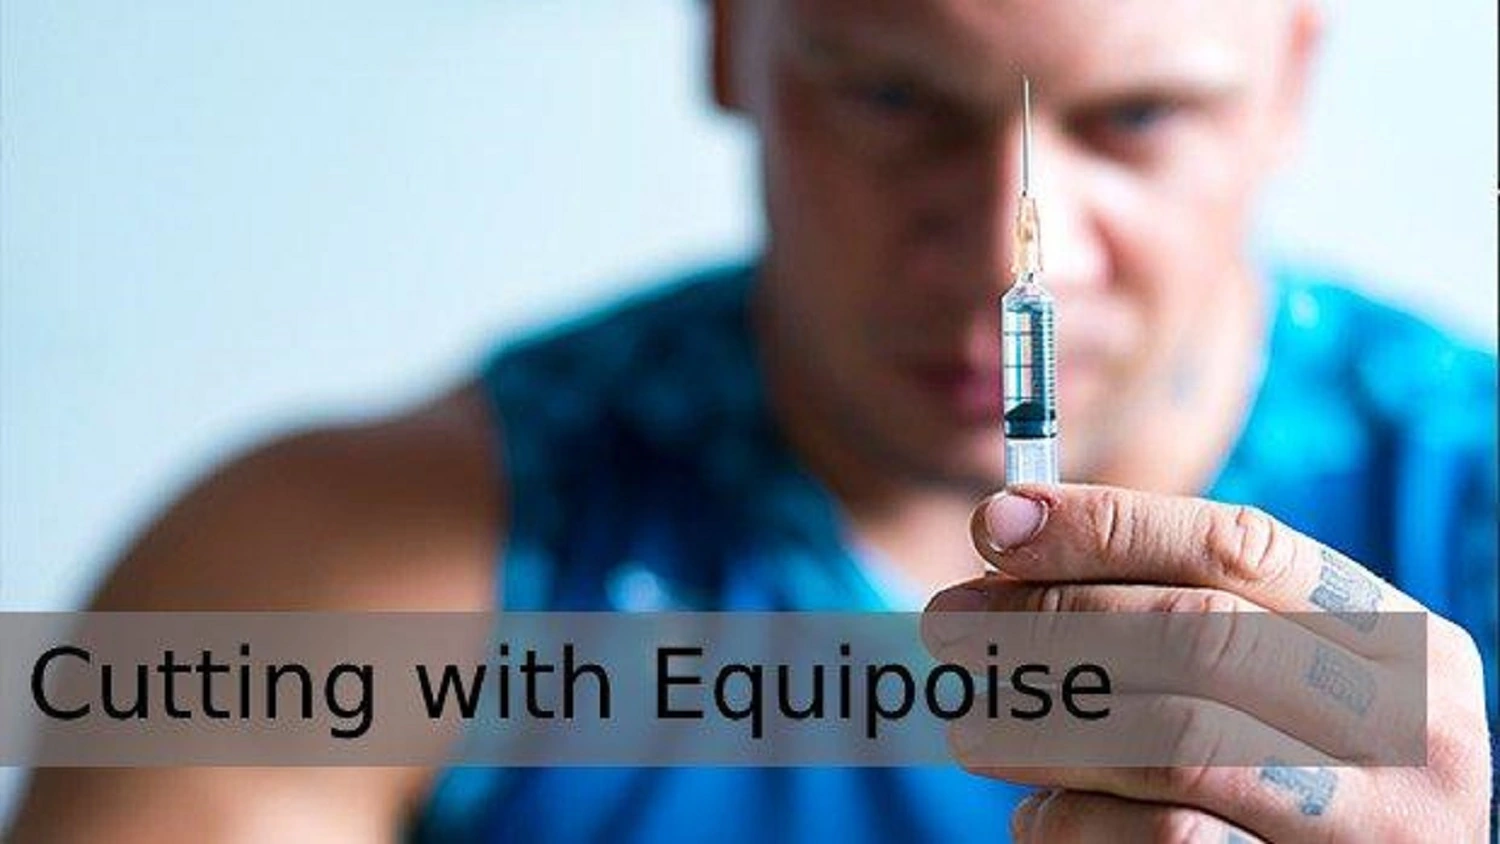 Cutting with Equipoise